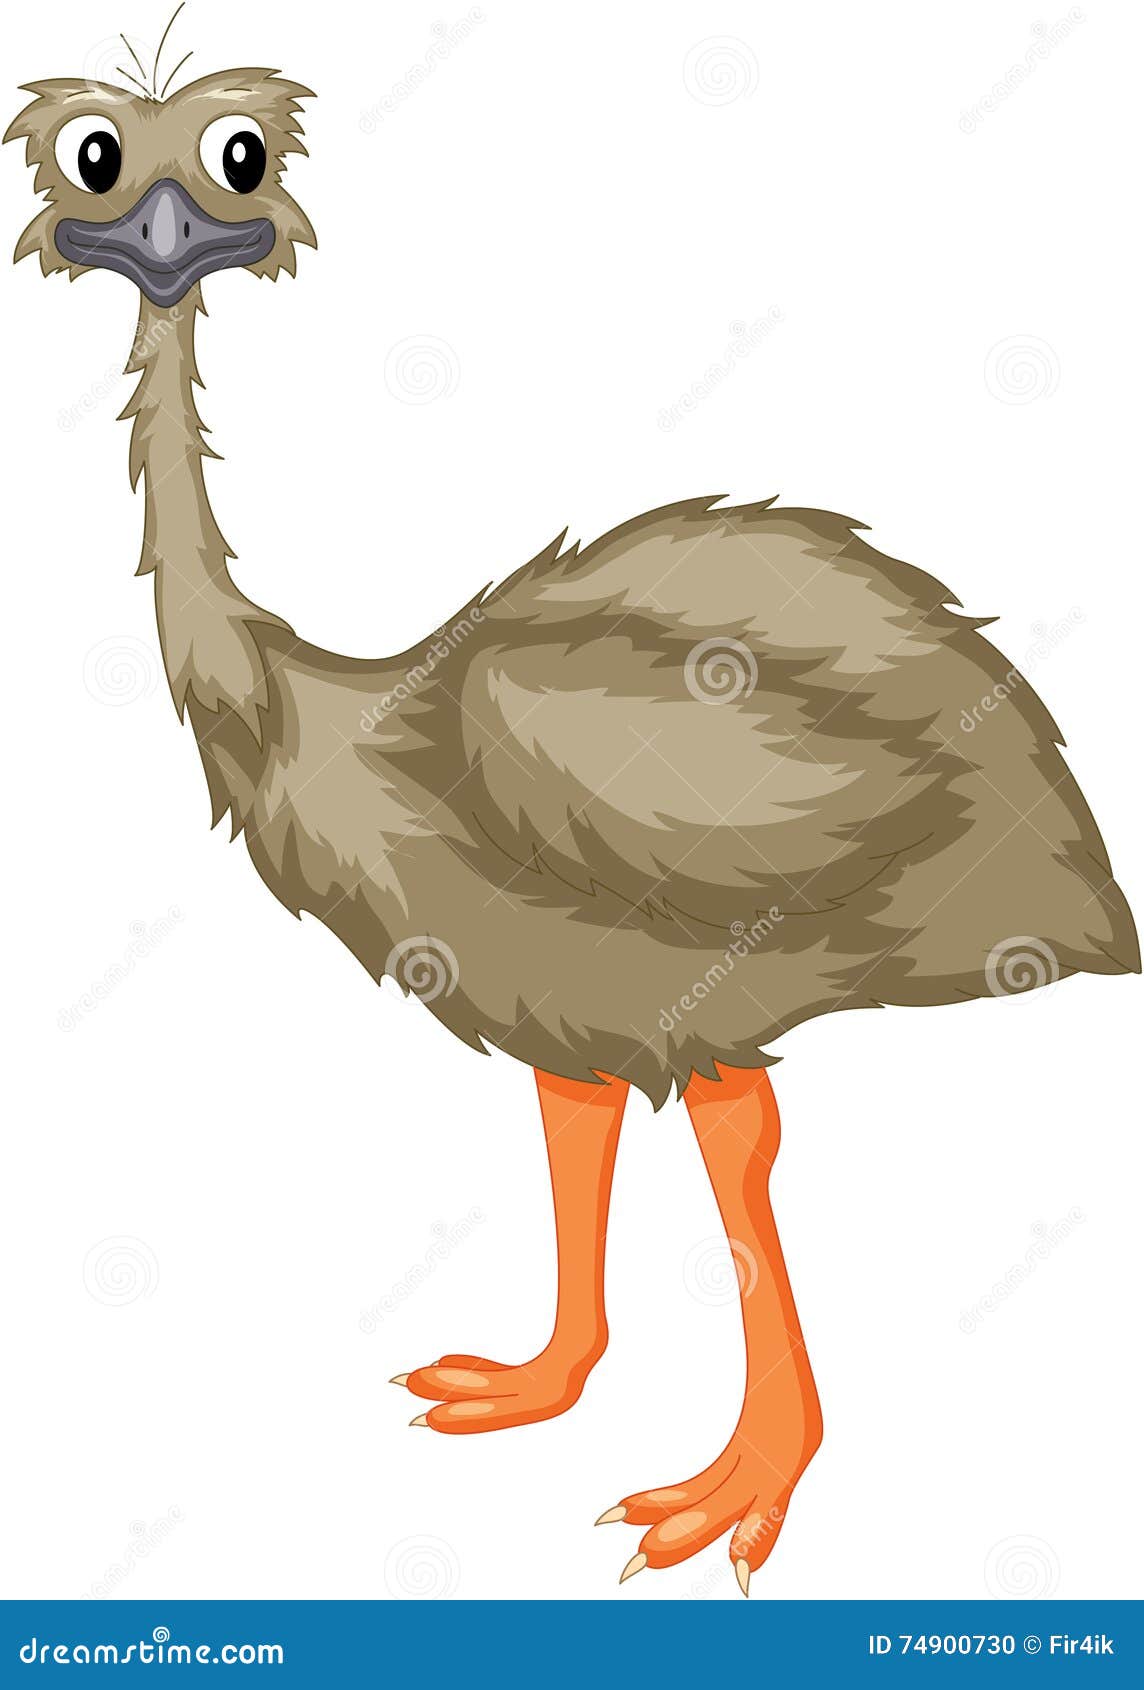 Emu Cartoons, Illustrations & Vector Stock Images - 2360 Pictures to